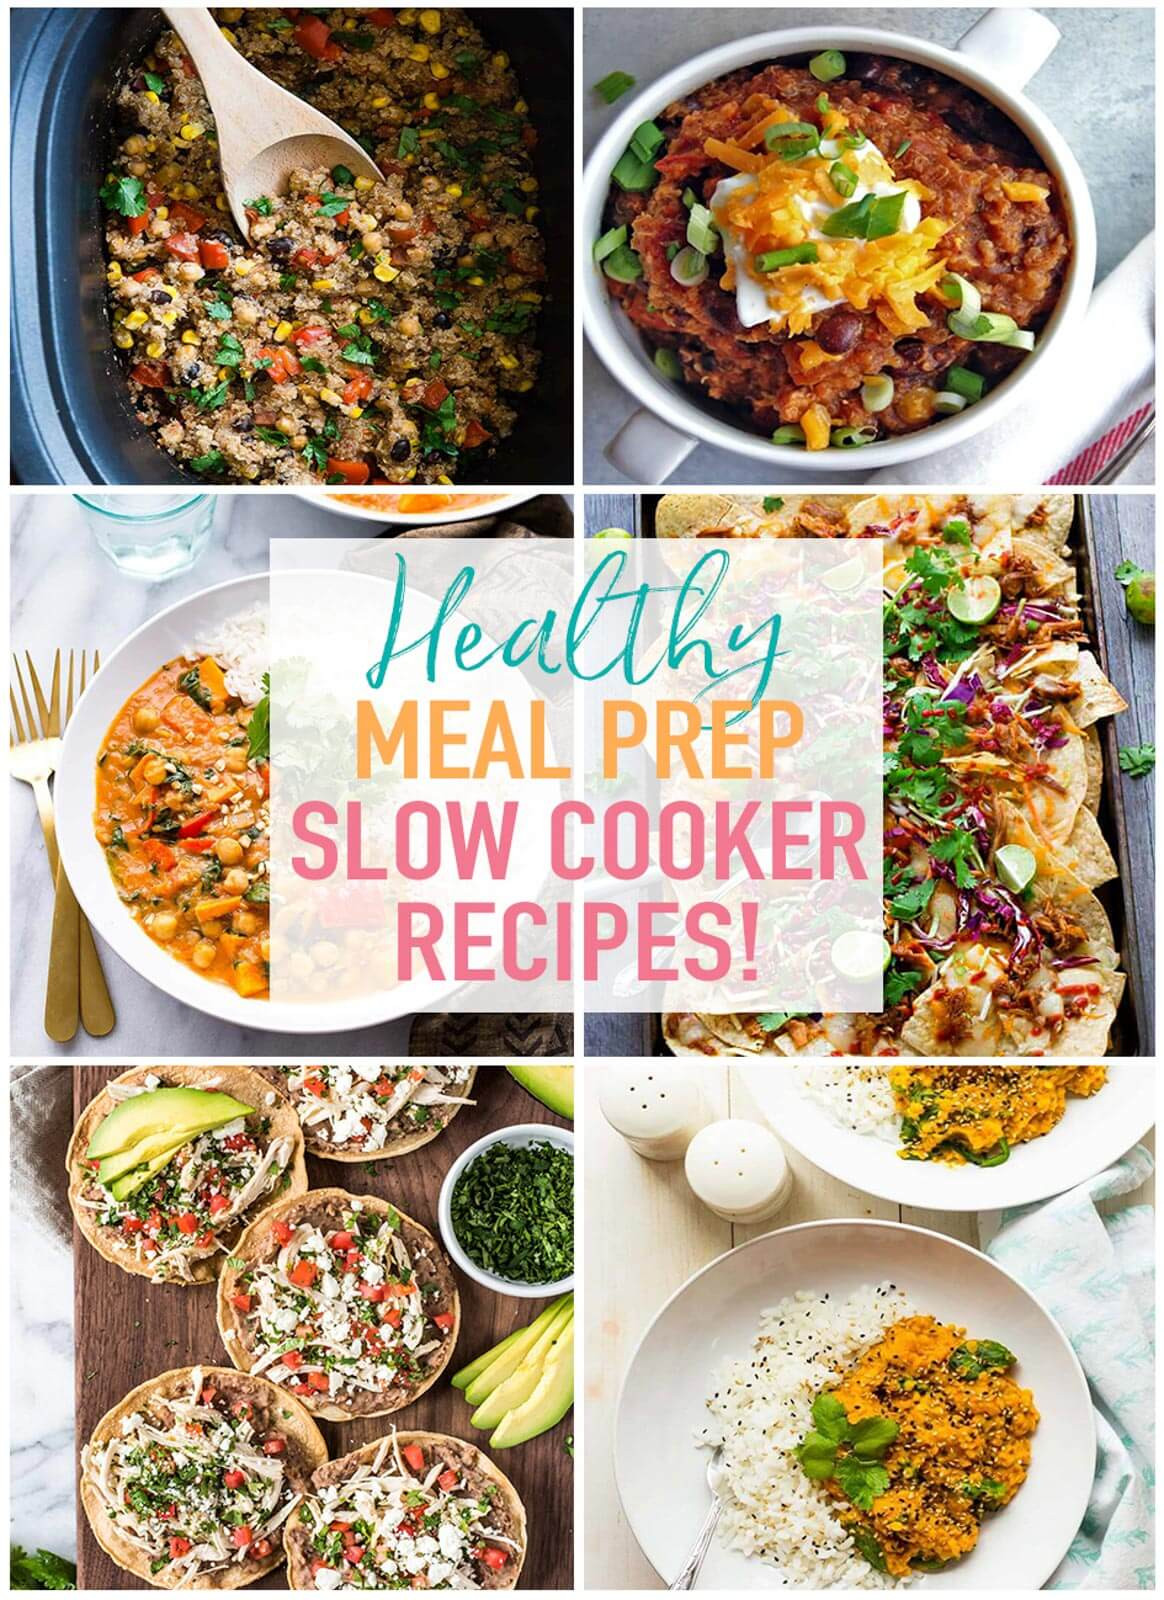 Easy Slow Cooker Recipes Healthy
 Healthy Slow cooker recipes for meal prep The Girl on Bloor